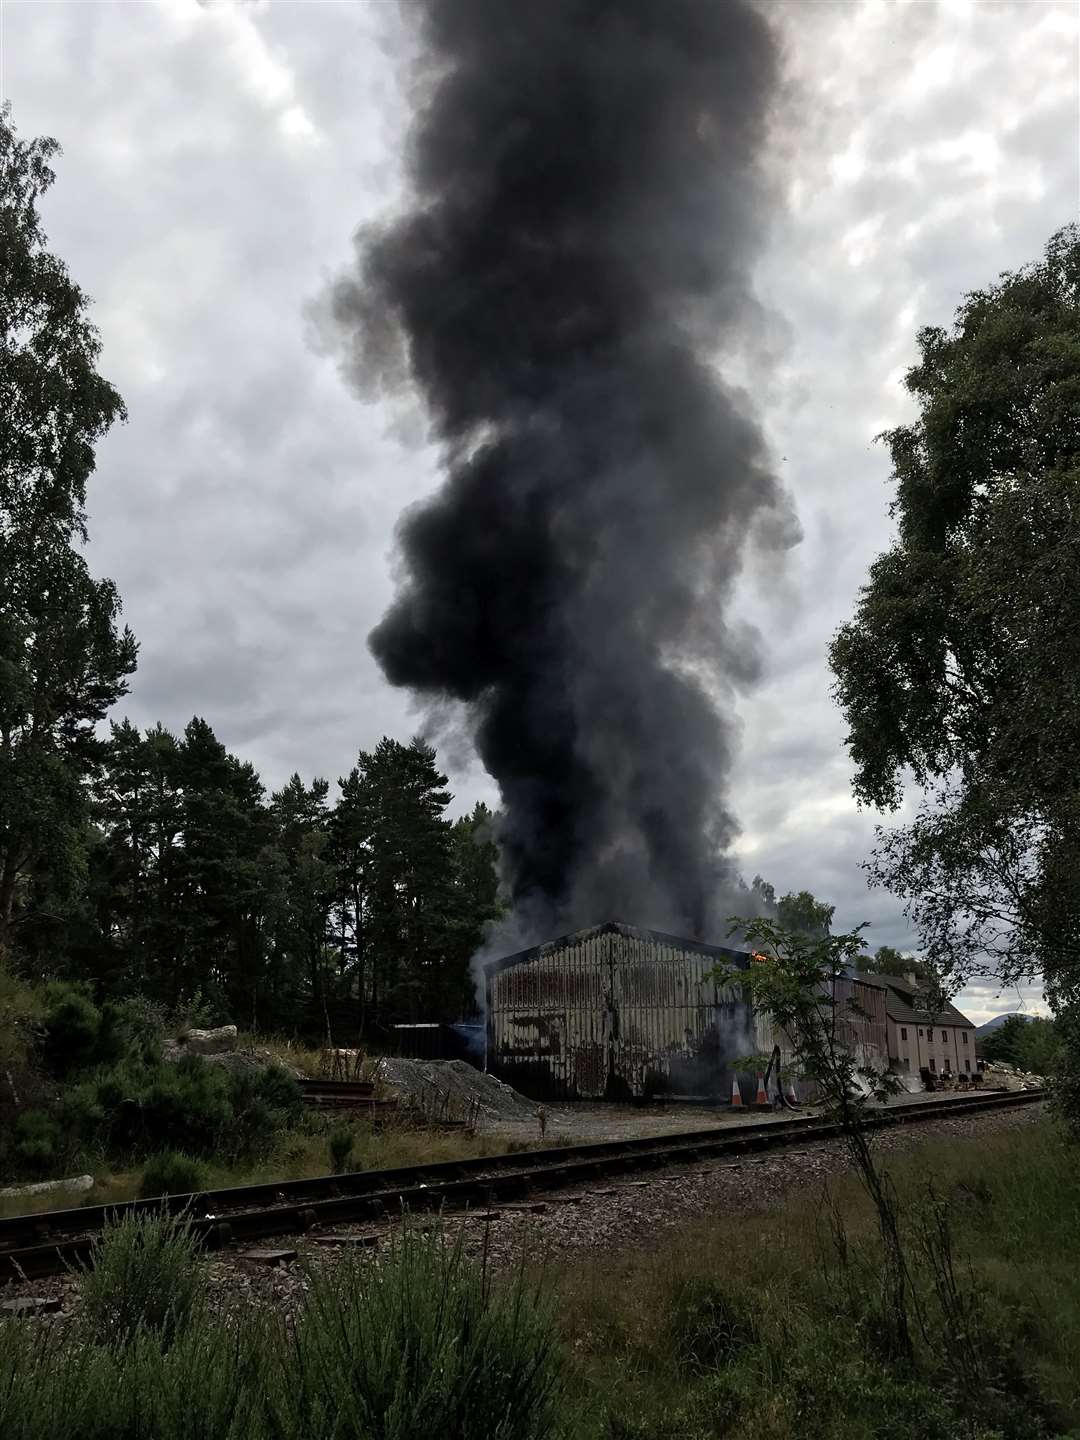 The railway workshed on fire near to Boat of Garten station (Photo: Duncan Stewart)